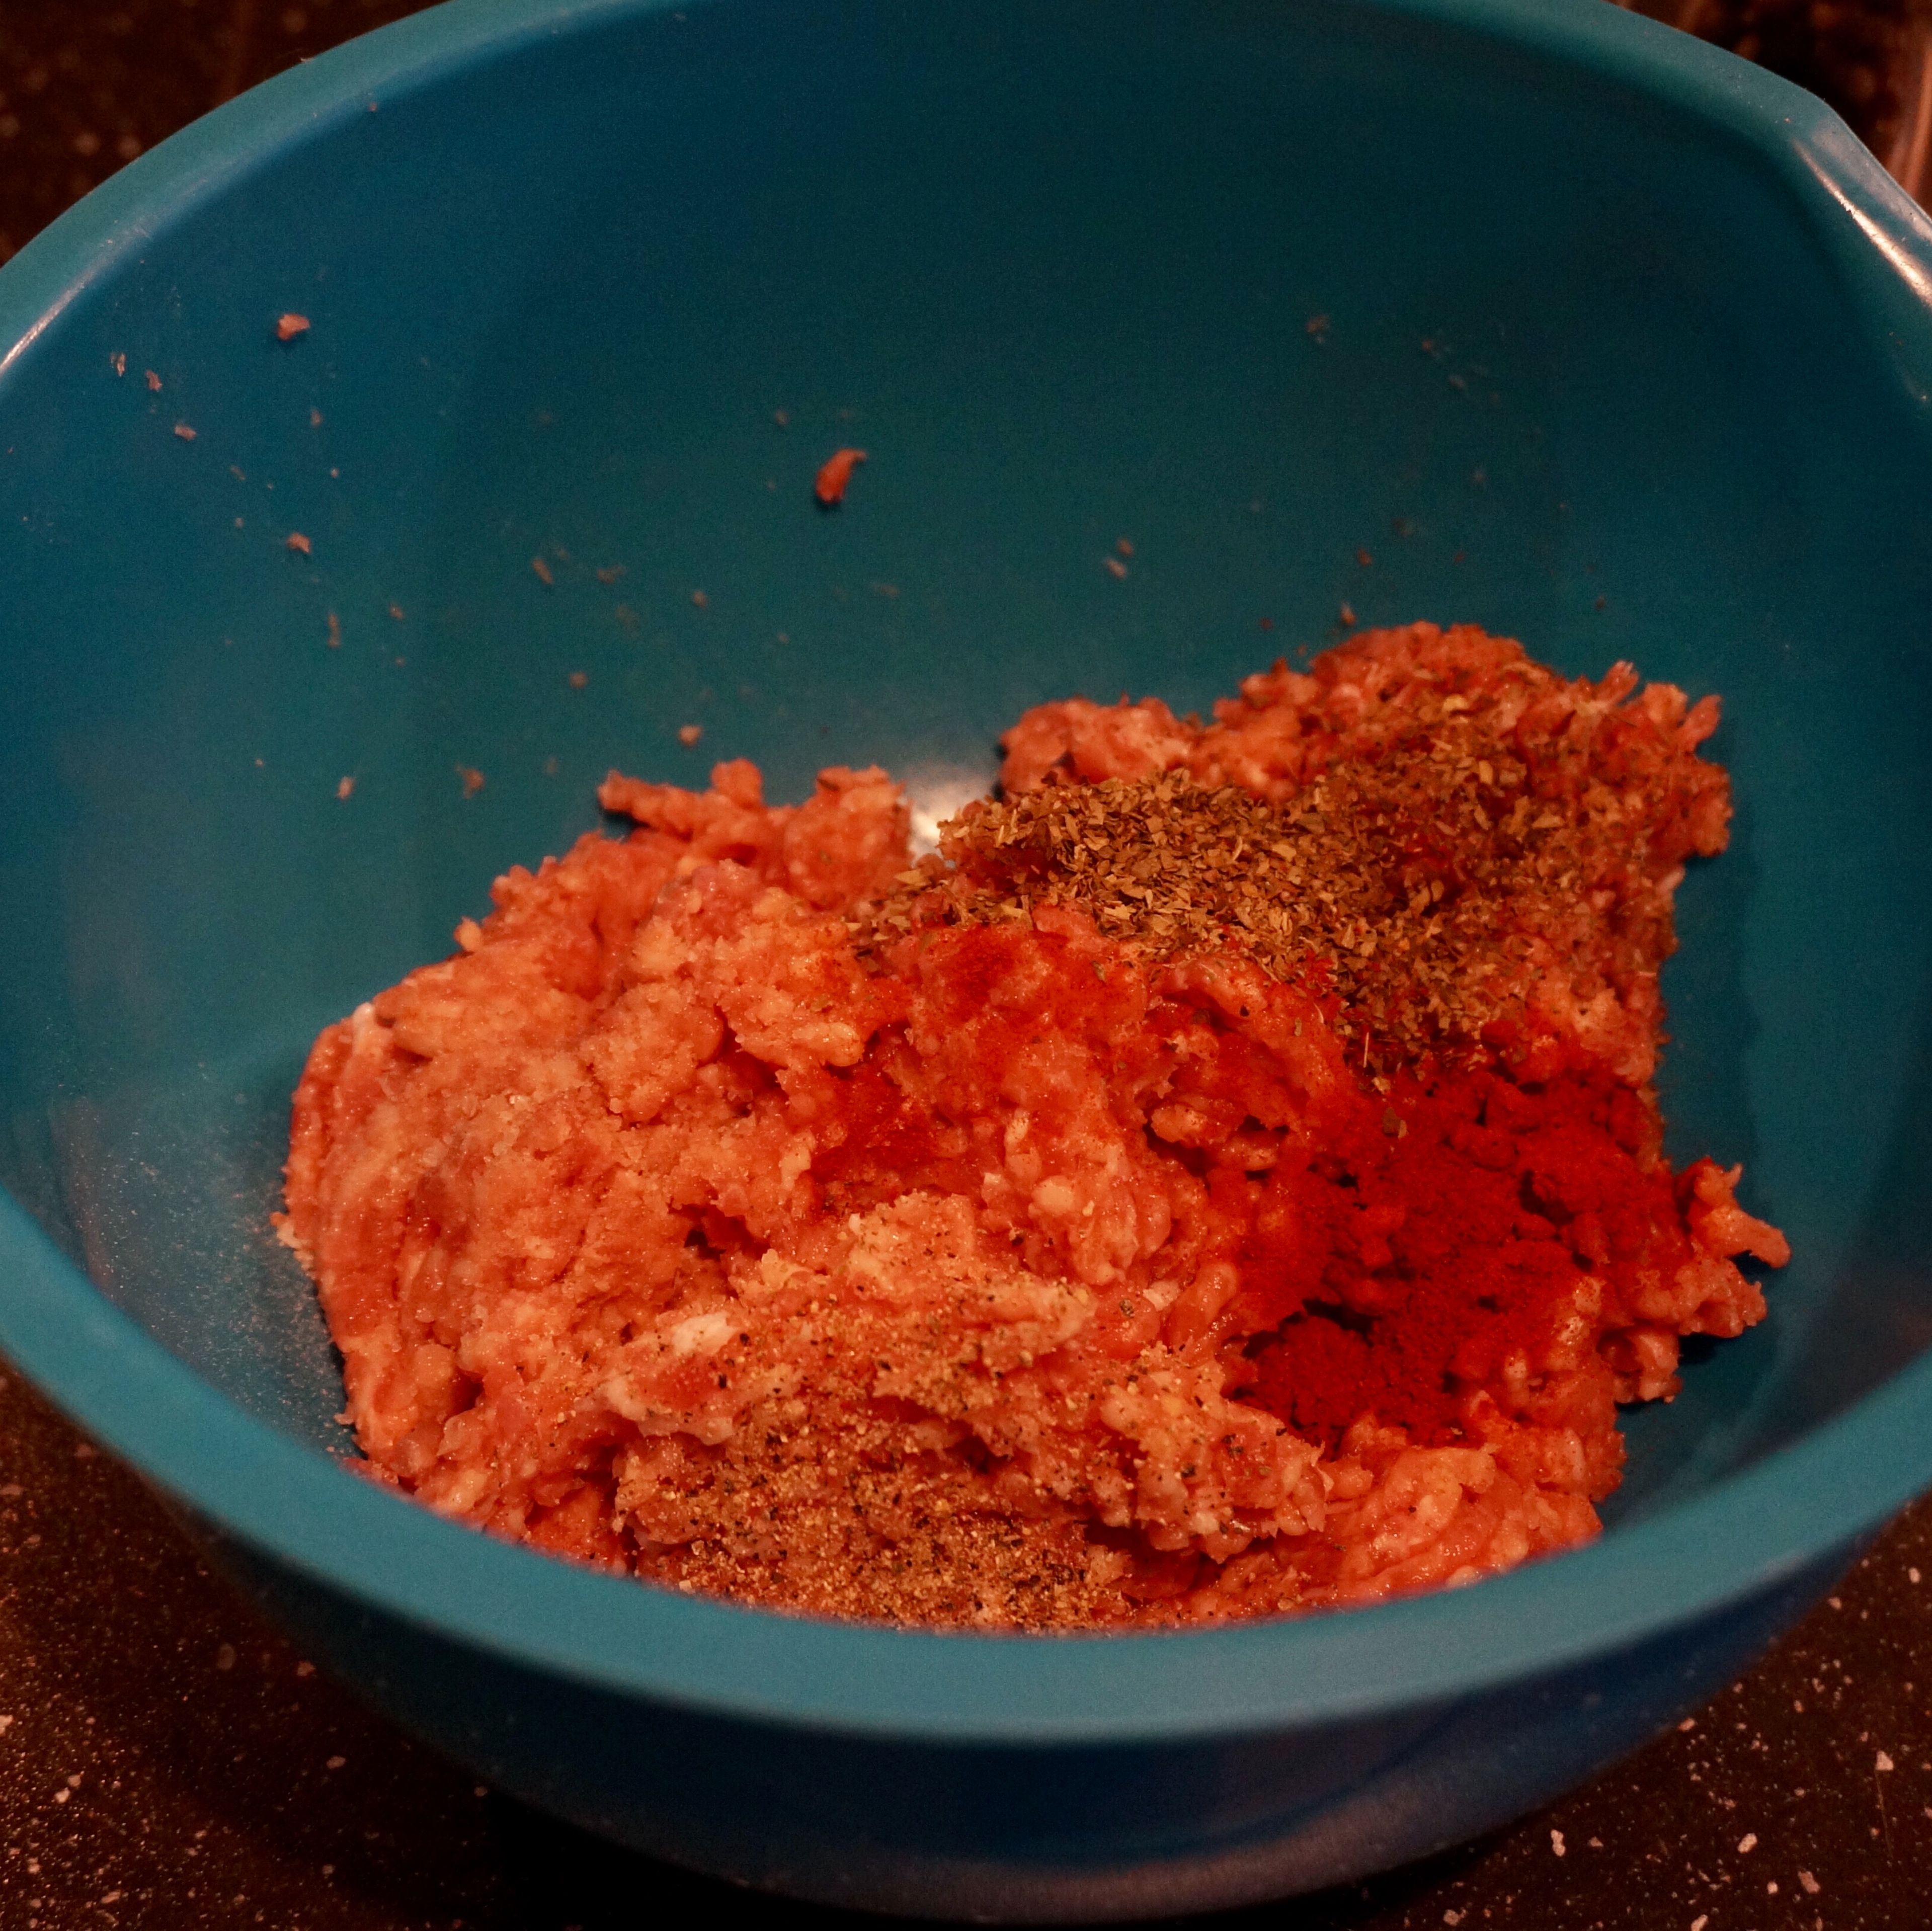 Add dried basil, paprika, salt, pepper to the minced meat. Mix everything thoroughly and add to the saucepan. Simmer for about 5 minutes